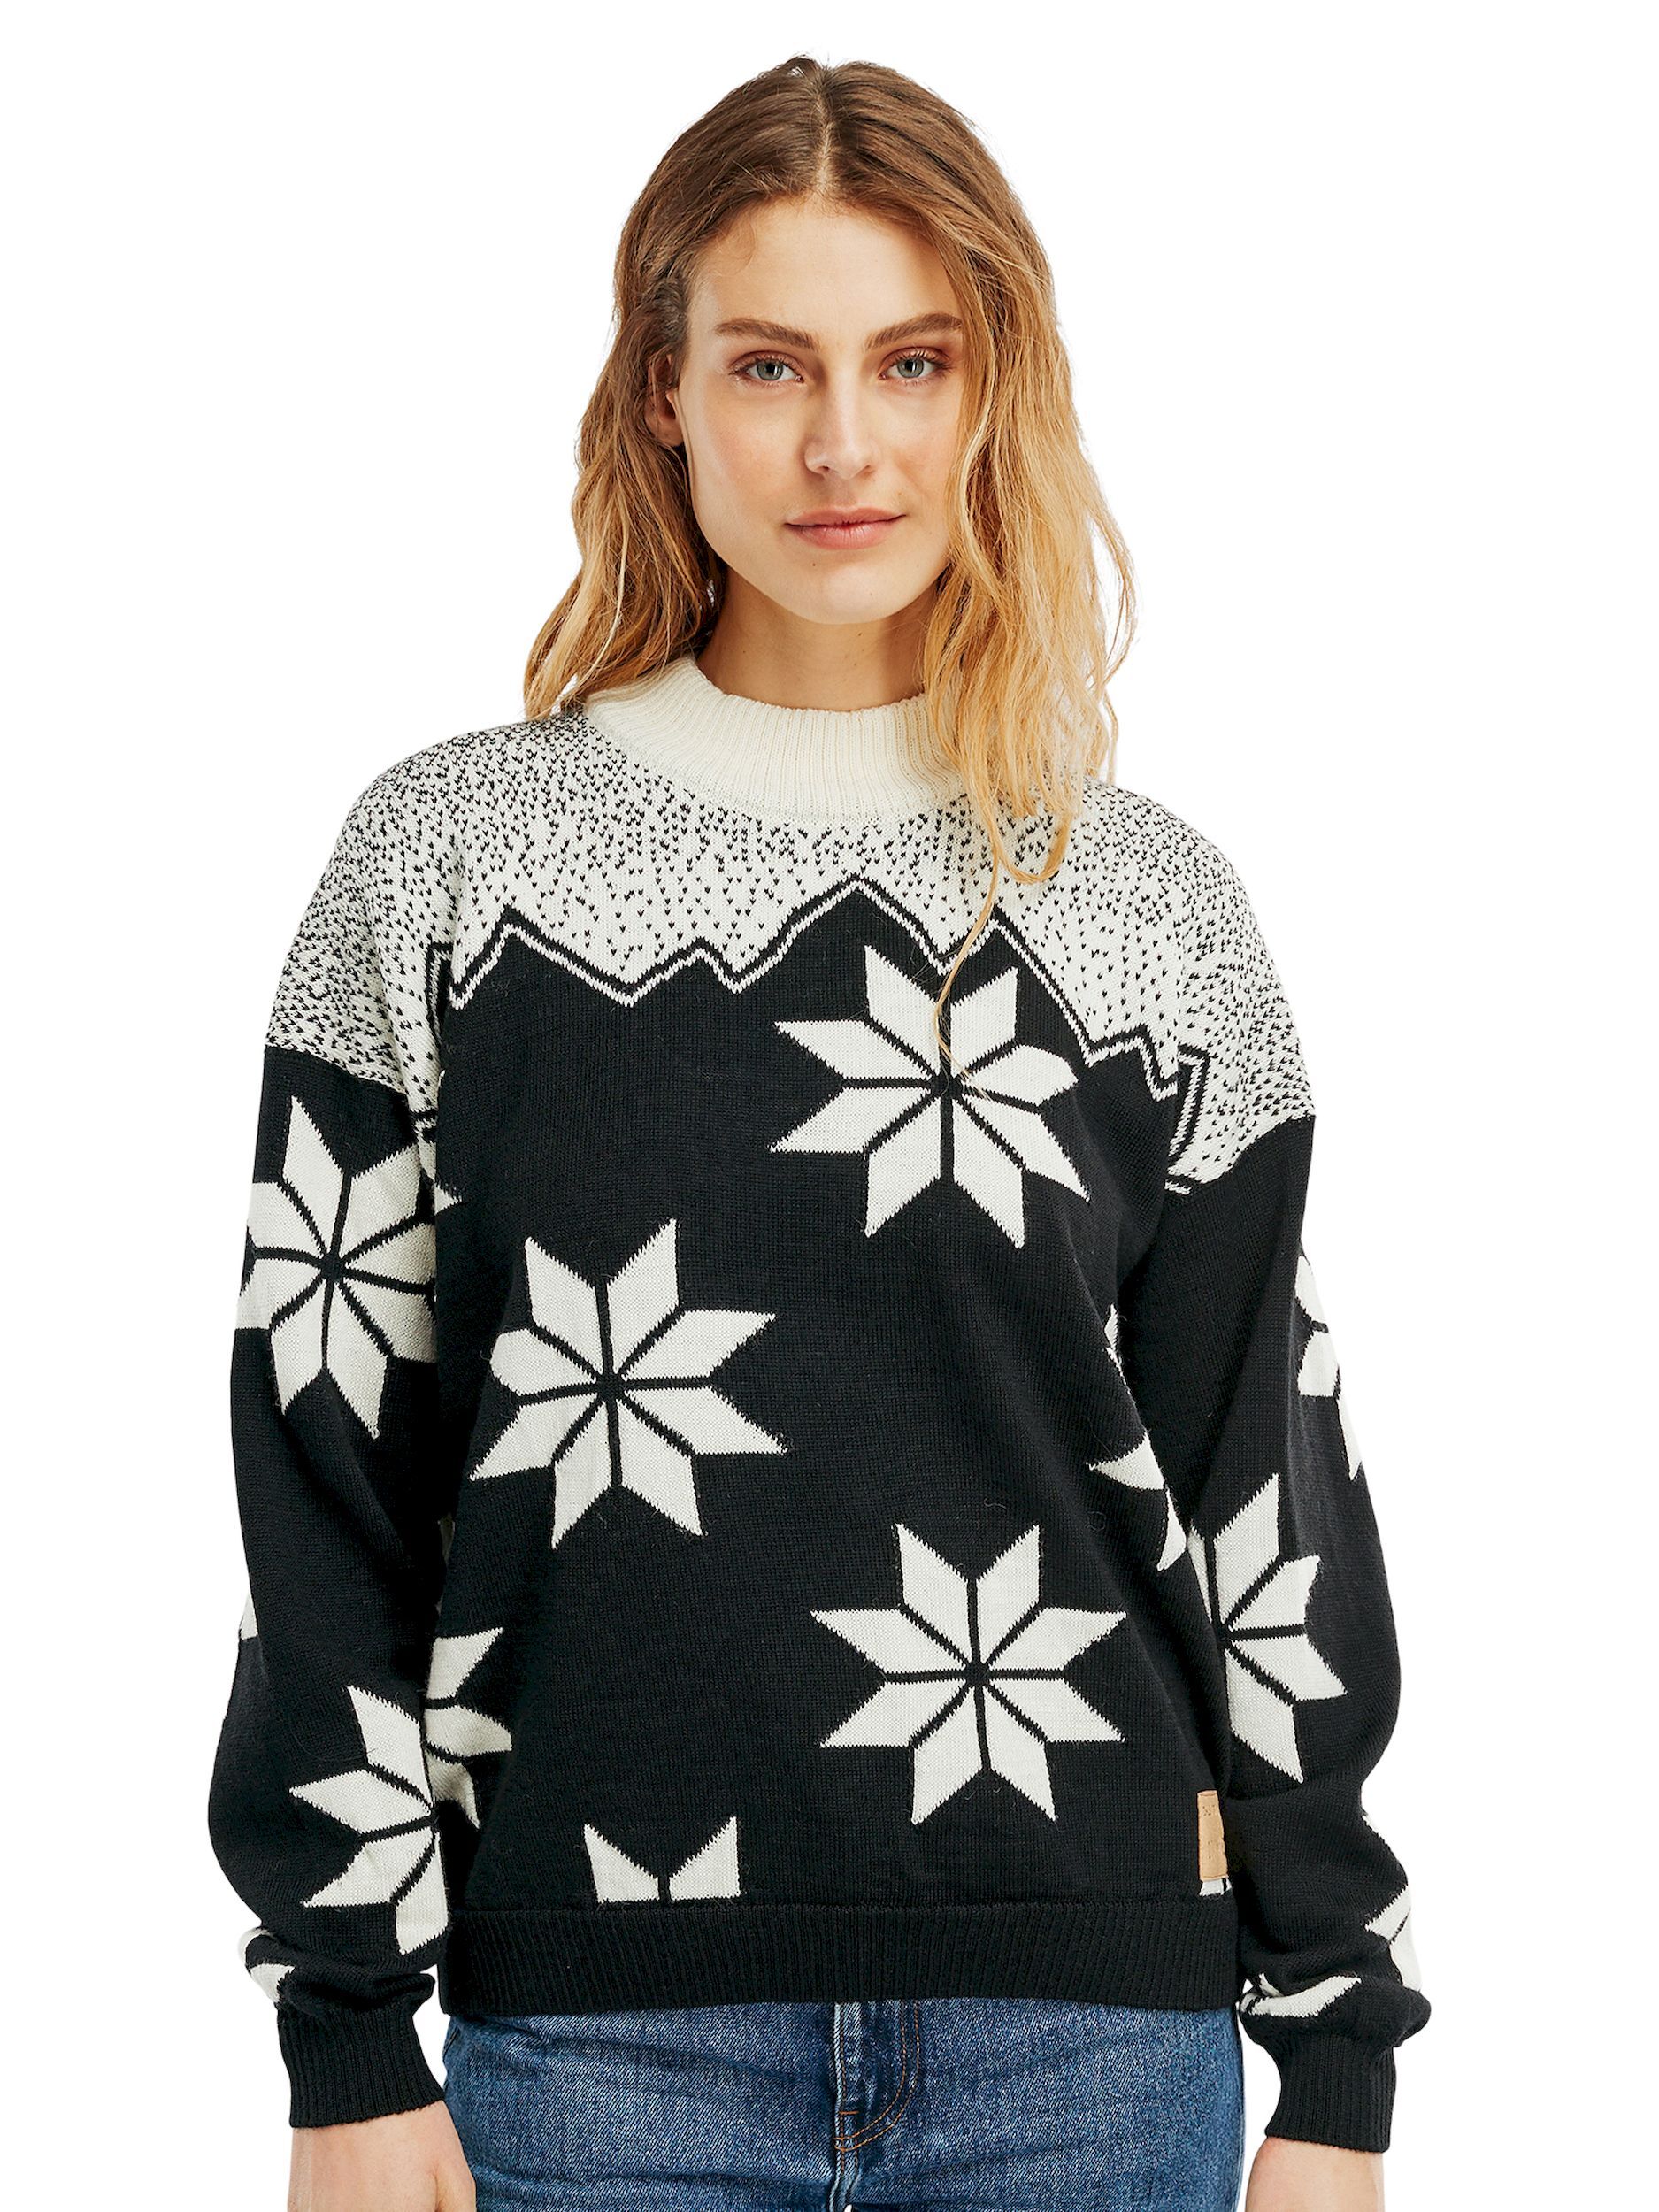 Dale of Norway Winter Star Feminine Sweater - Pullover - Naiset